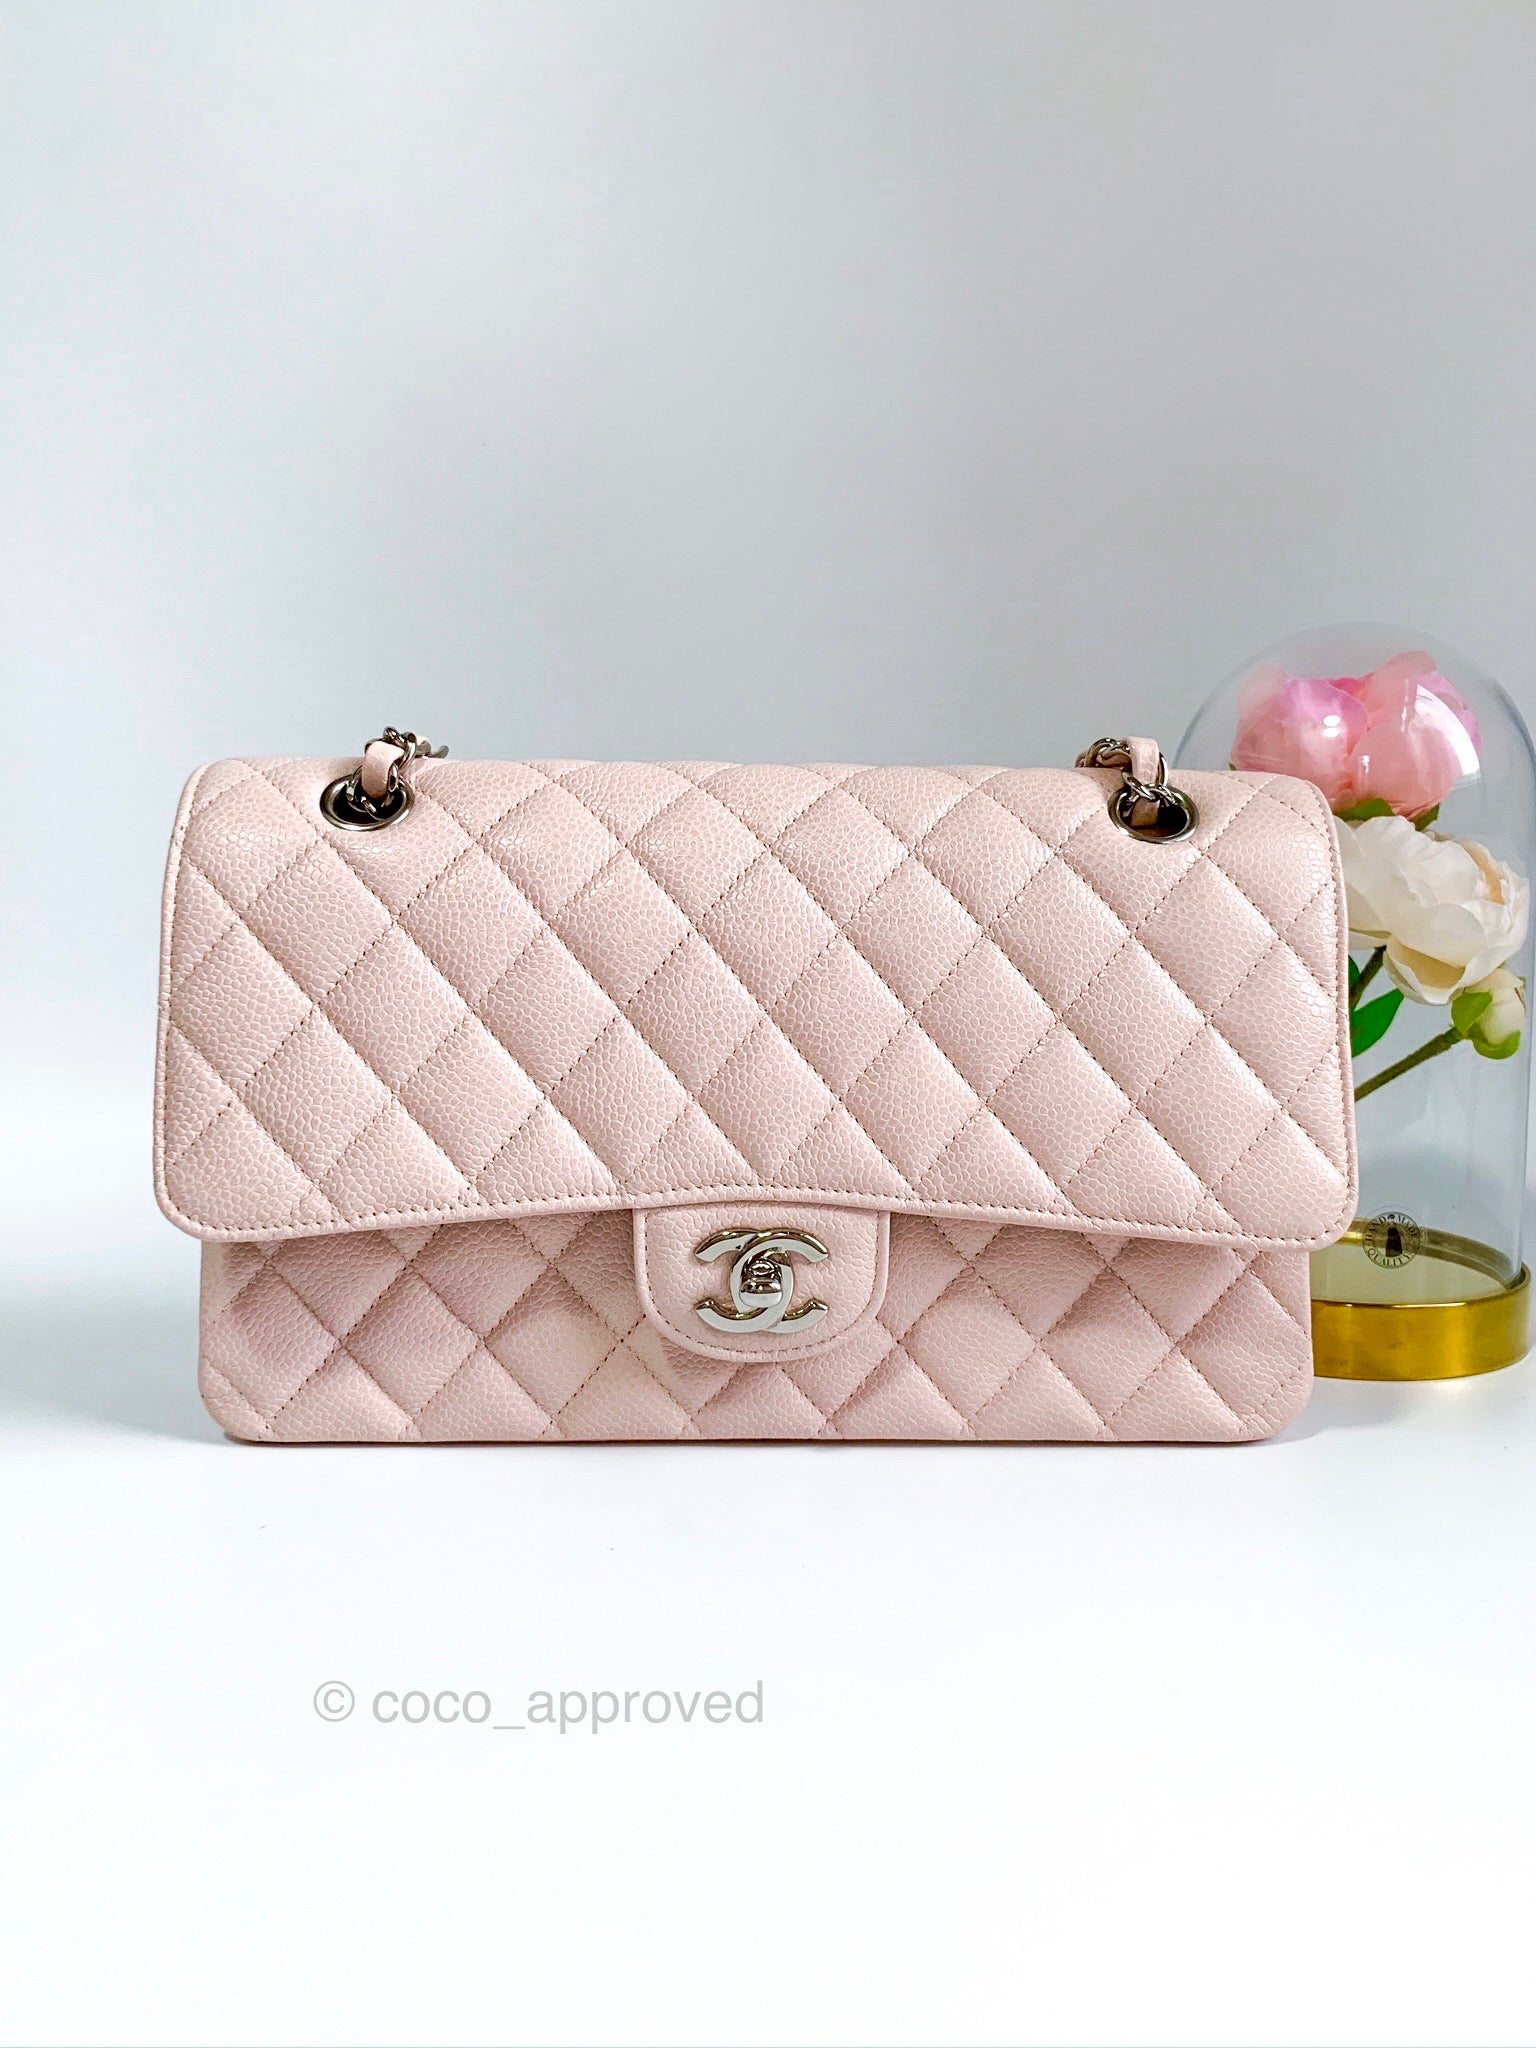 New 🦄 Chanel 19 small 22P light baby pink pastel gold silver